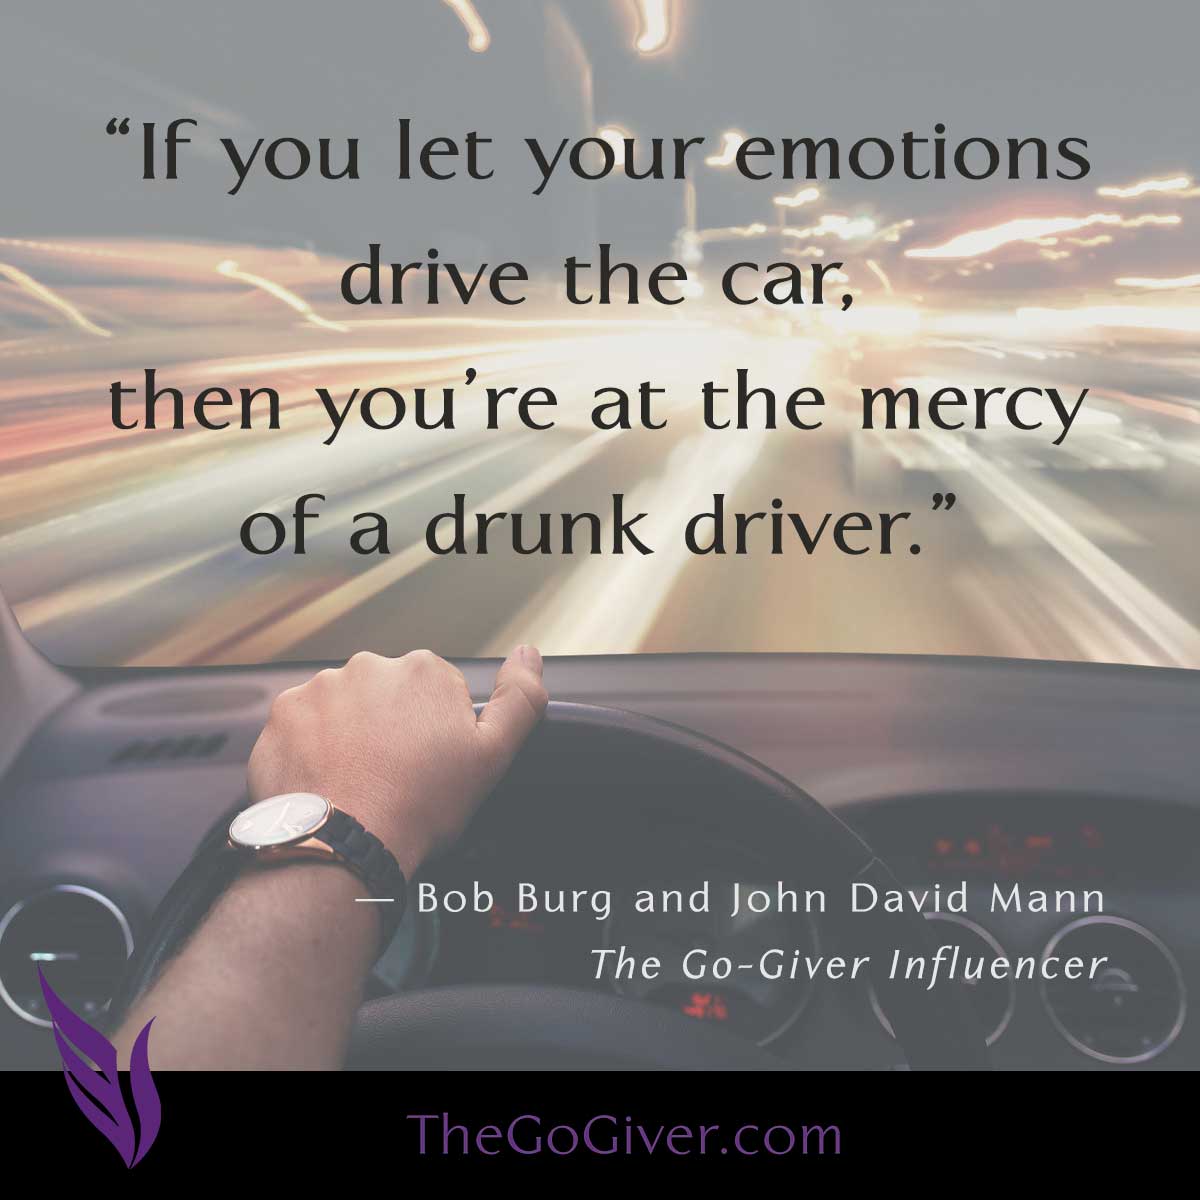 If you let your emotions drive the car, then you're at the mercy of a drunk driver.